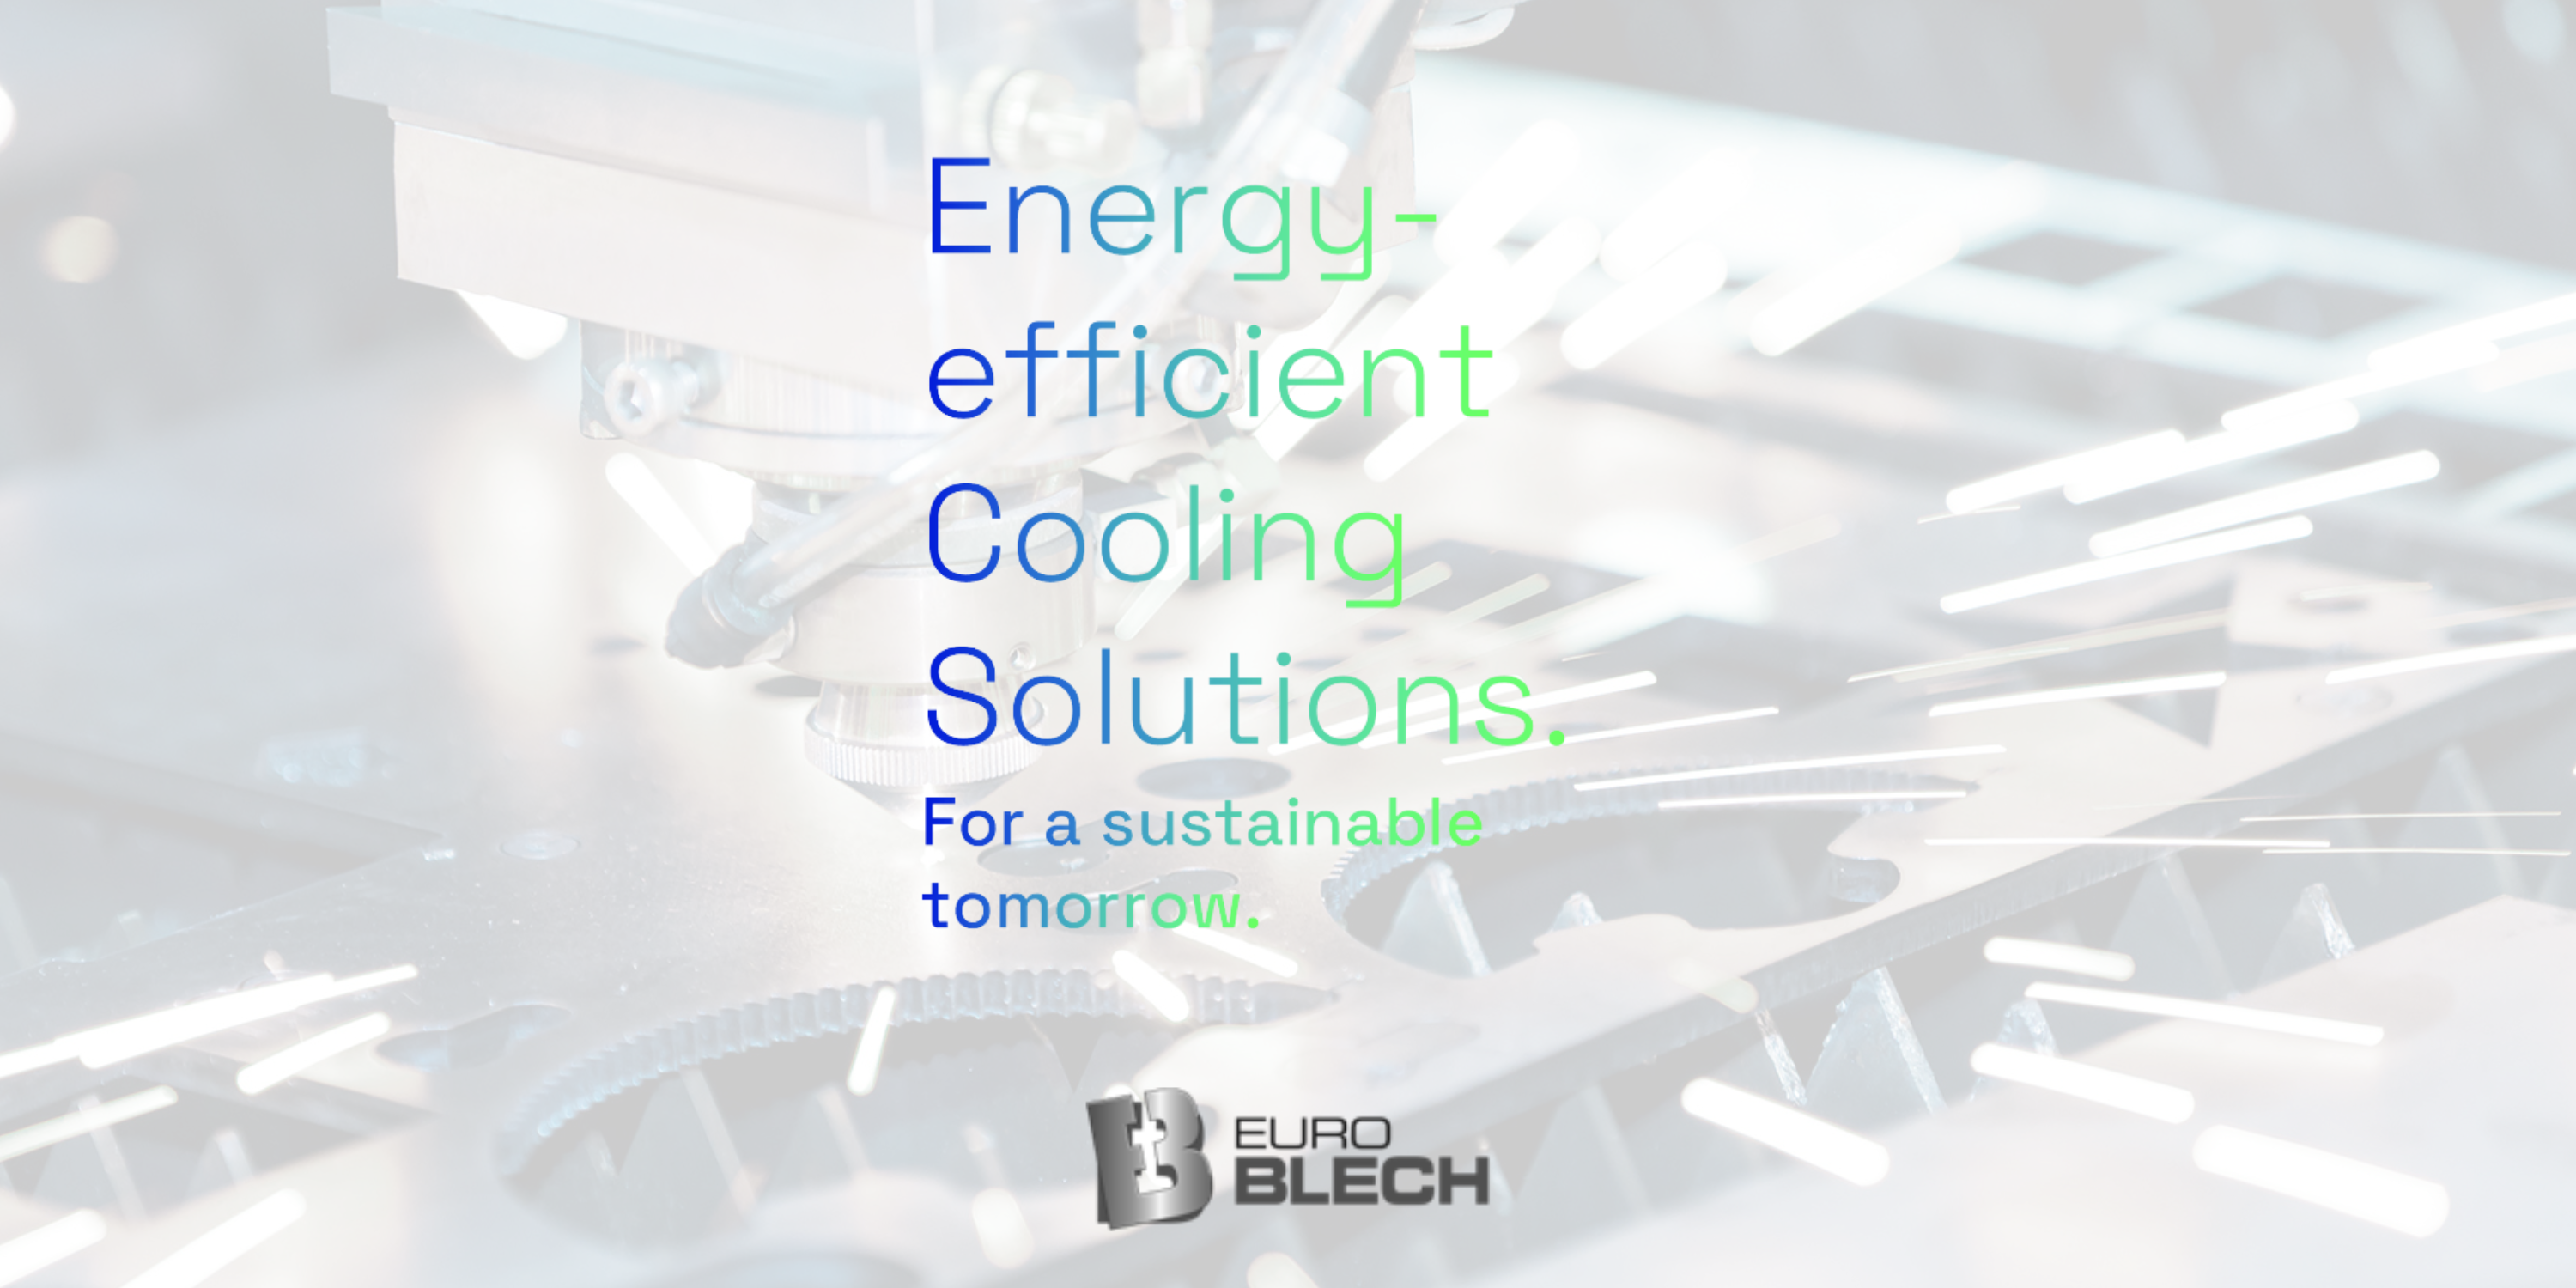 Energyefficient cooling solutions. For a sustainable tomorrow.